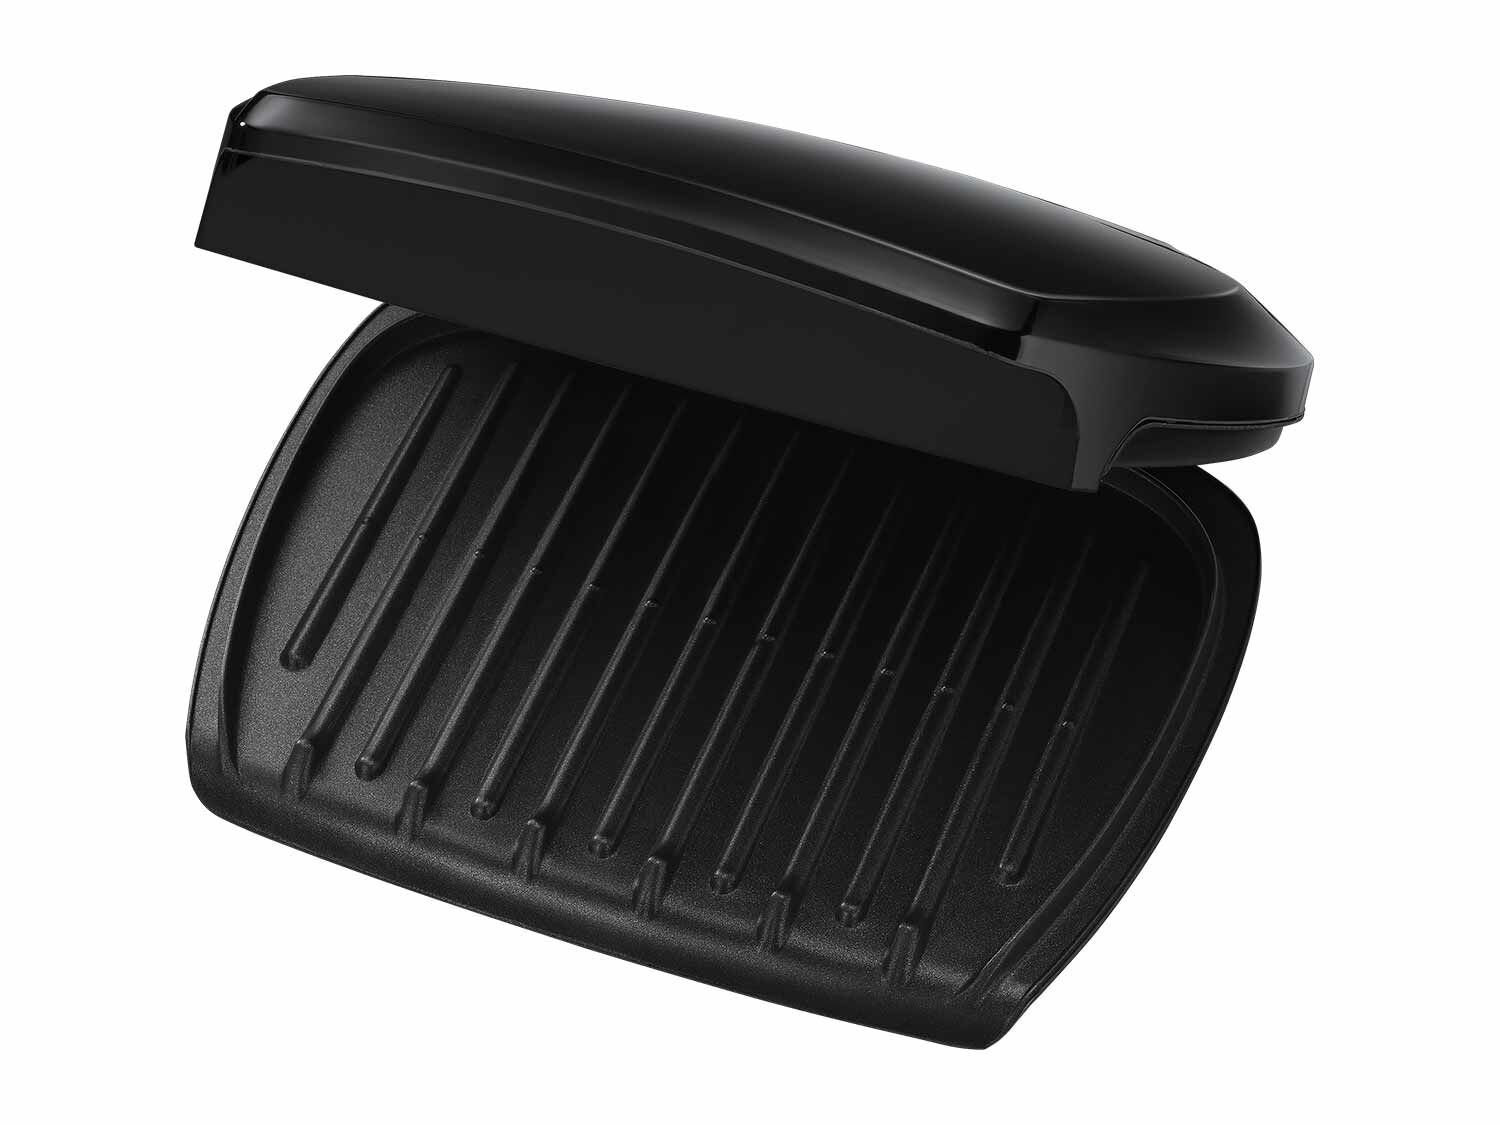 Russel Hobbs Grill eléctrico George Foreman 1630W